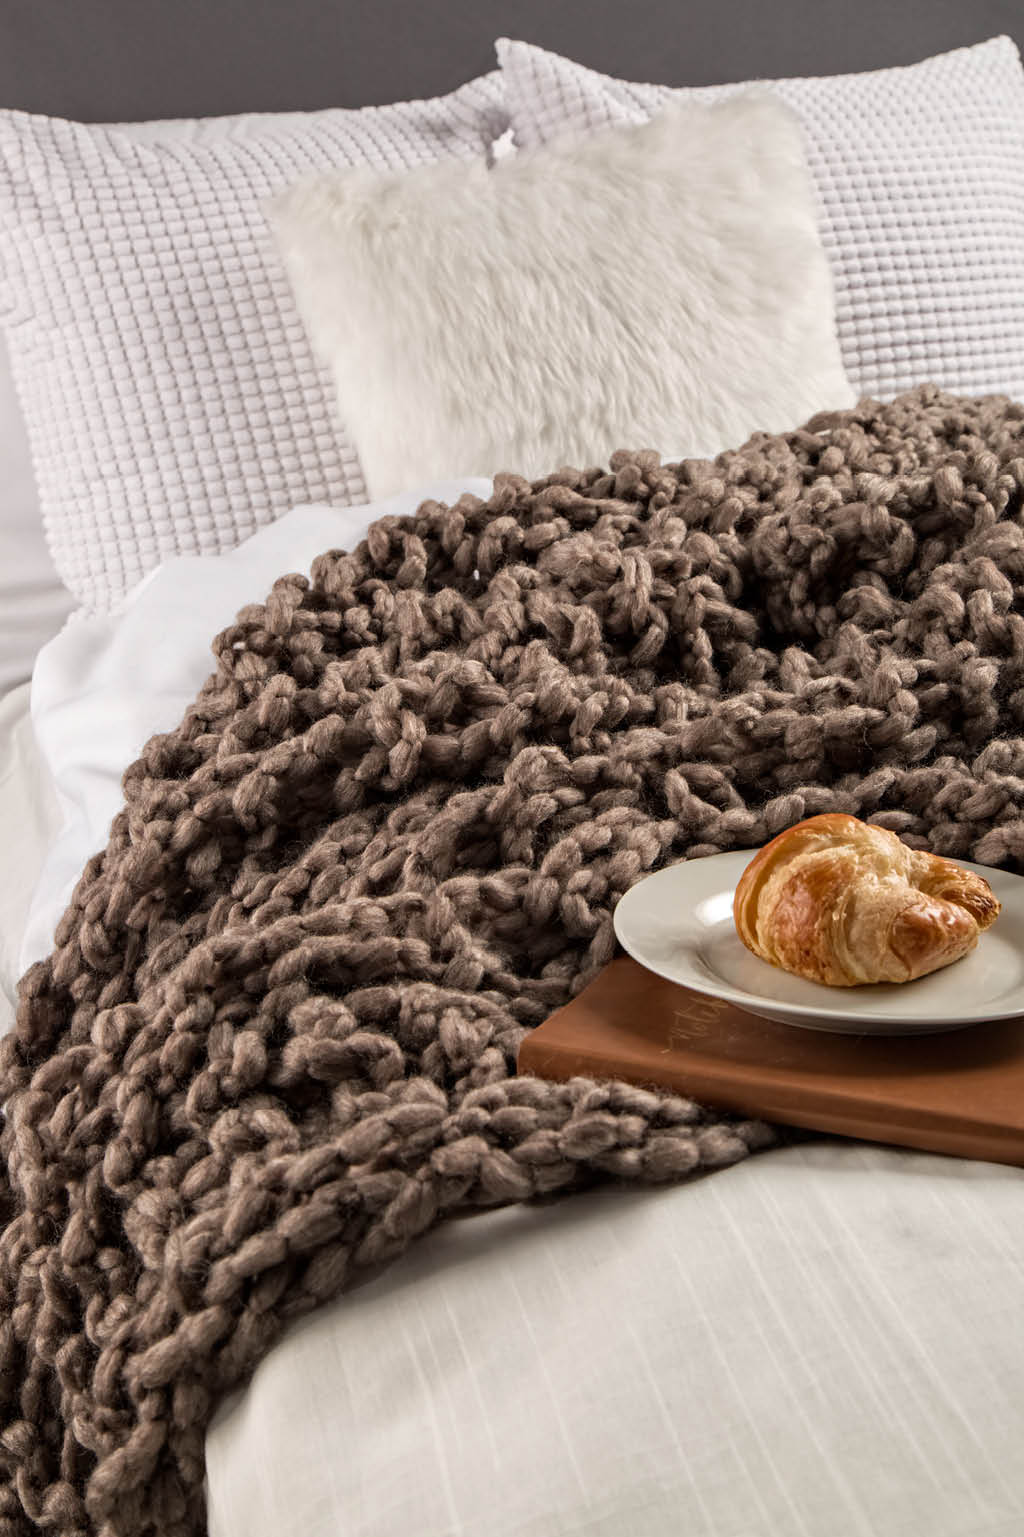 Chunky arm knit blanket on bed